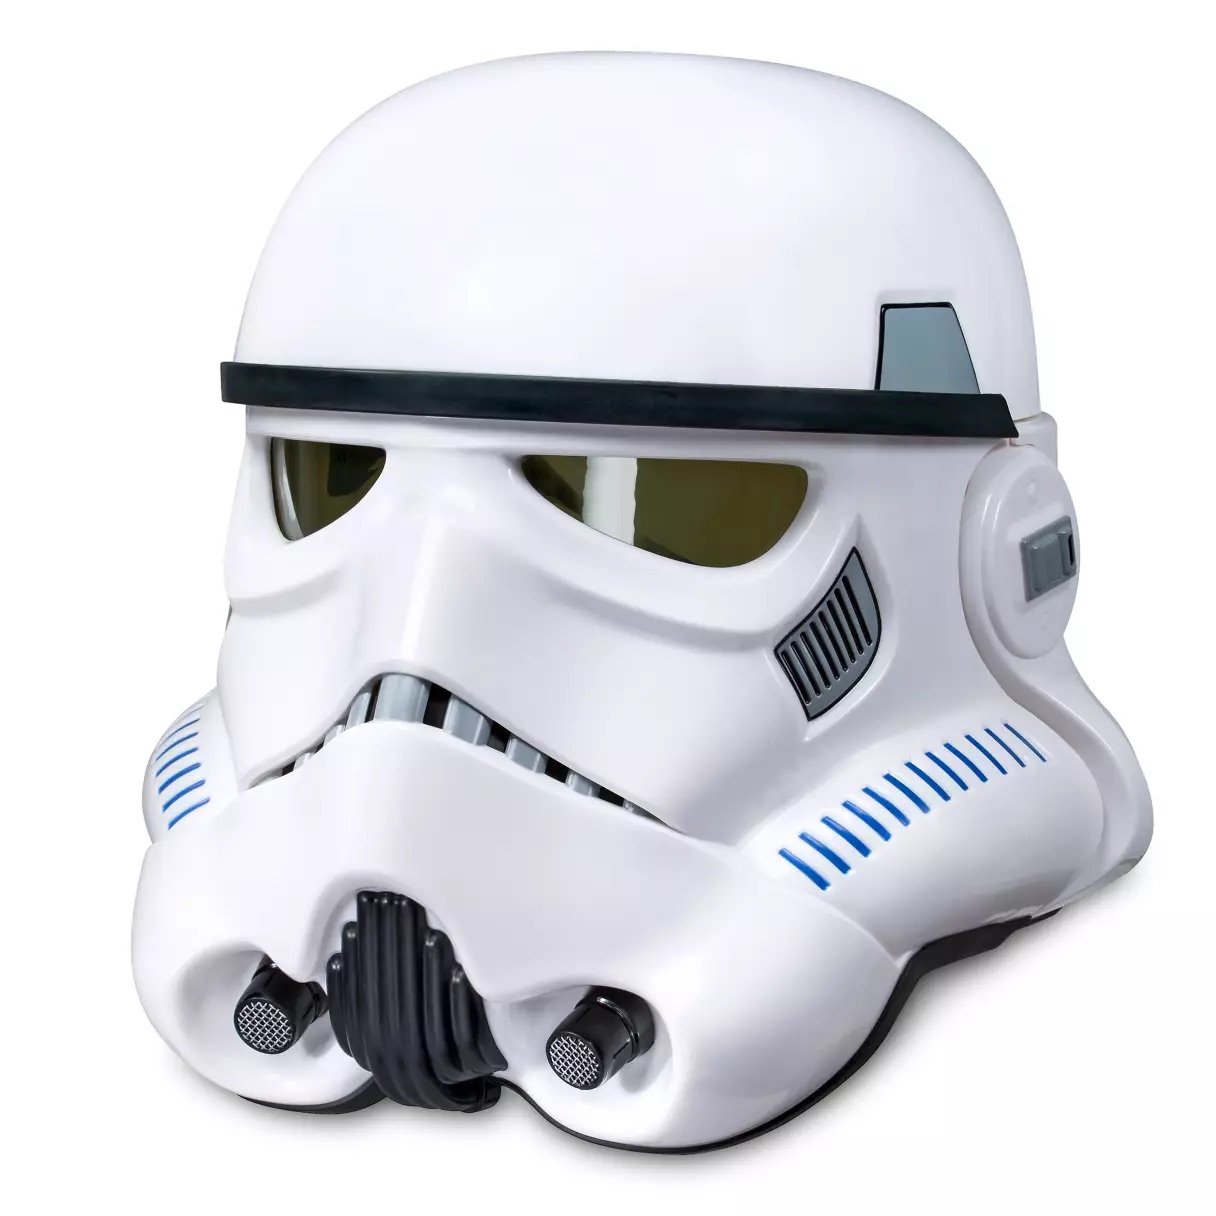 Imperial Stormtrooper Electronic Voice Changer Helmet by Hasbro – Star Wars- Rogue One – The Black Series Disney Store May the 4th Be With You Imperial Stormtrooper Helmet Merchandise April 2024 Helmet.jpeg